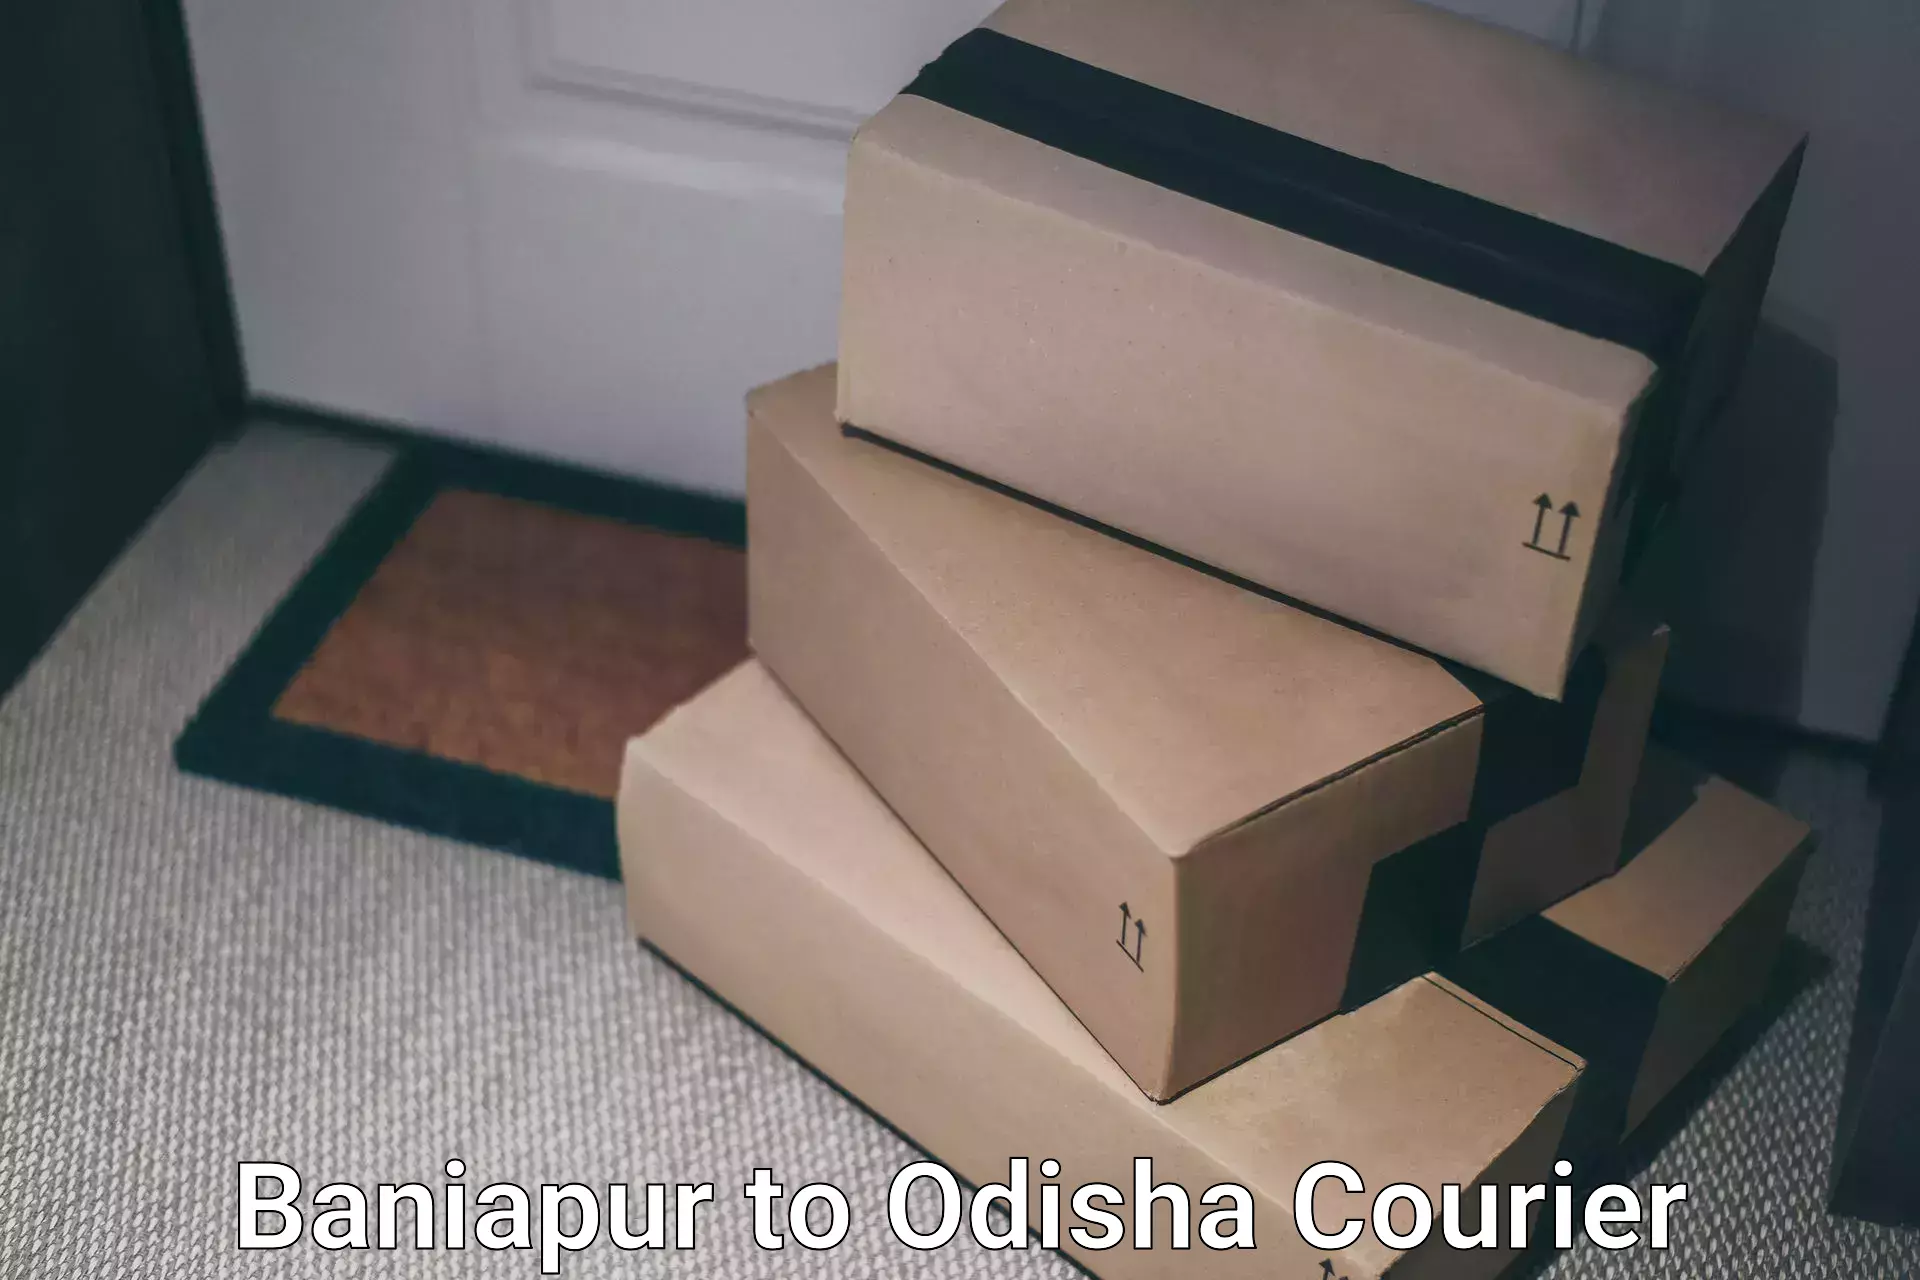 Next-day delivery options Baniapur to Pallahara